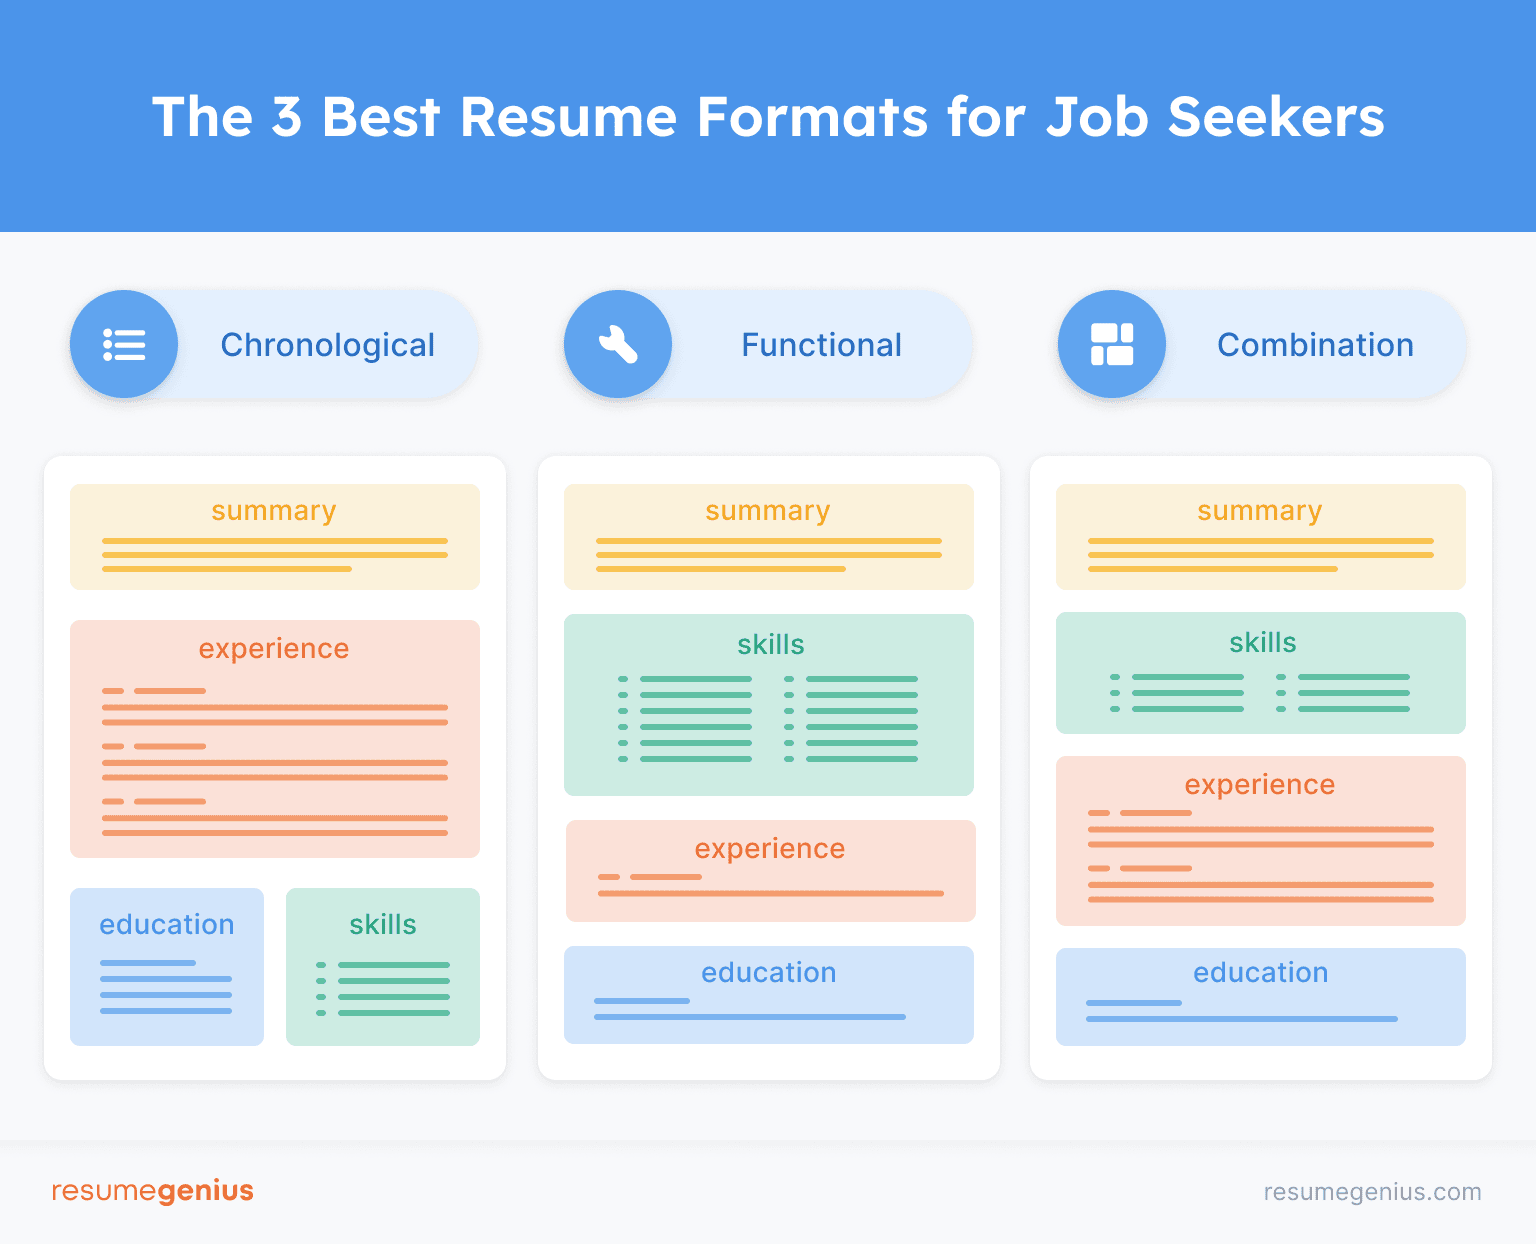 An infographic showing the three main resume formats